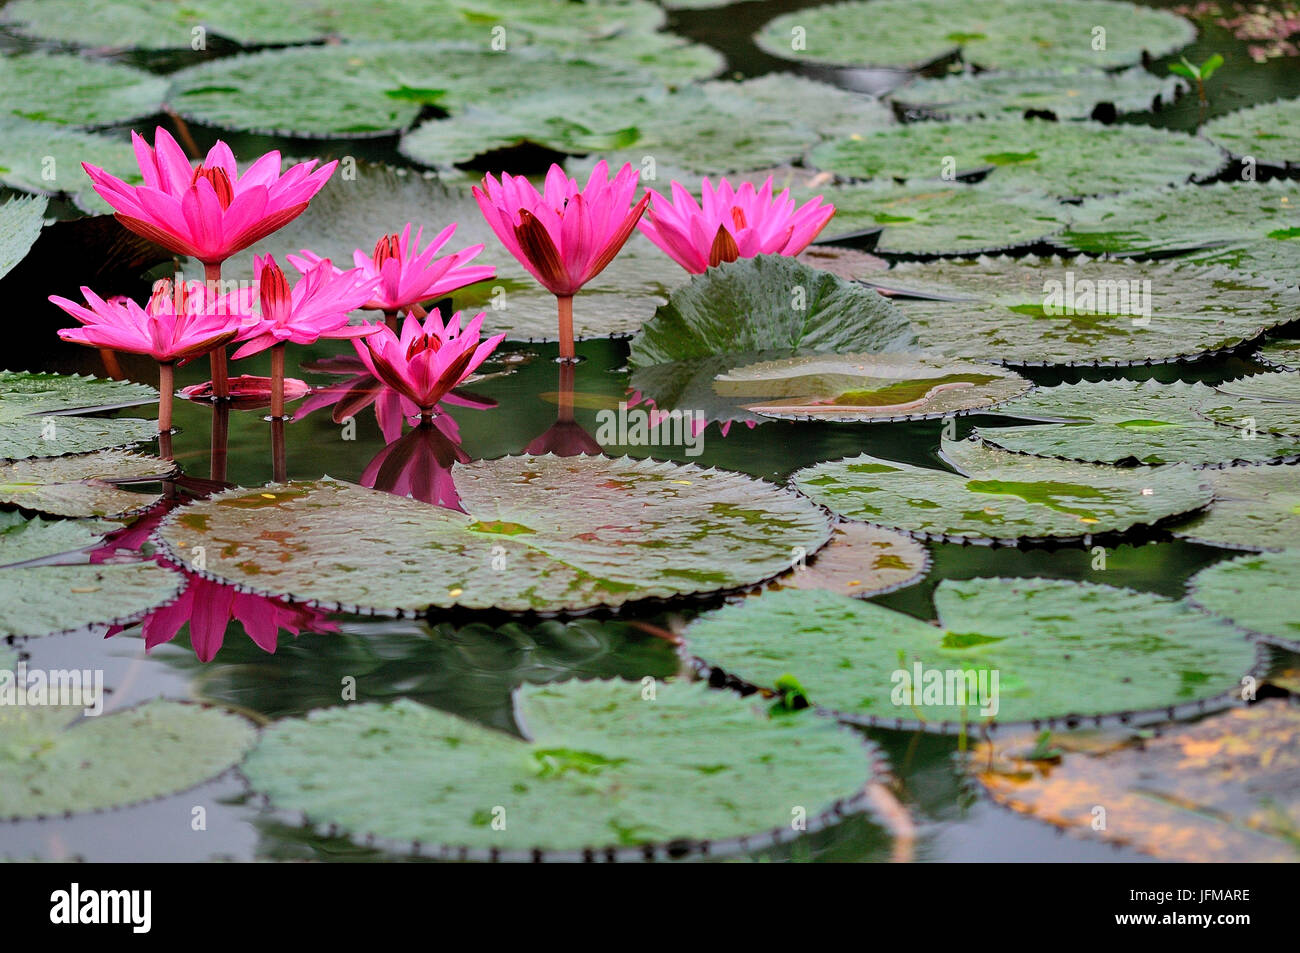 Flowers in the Ayutthaya historical park, in the waters surrounding the temples and statues of Buddha, Stock Photo